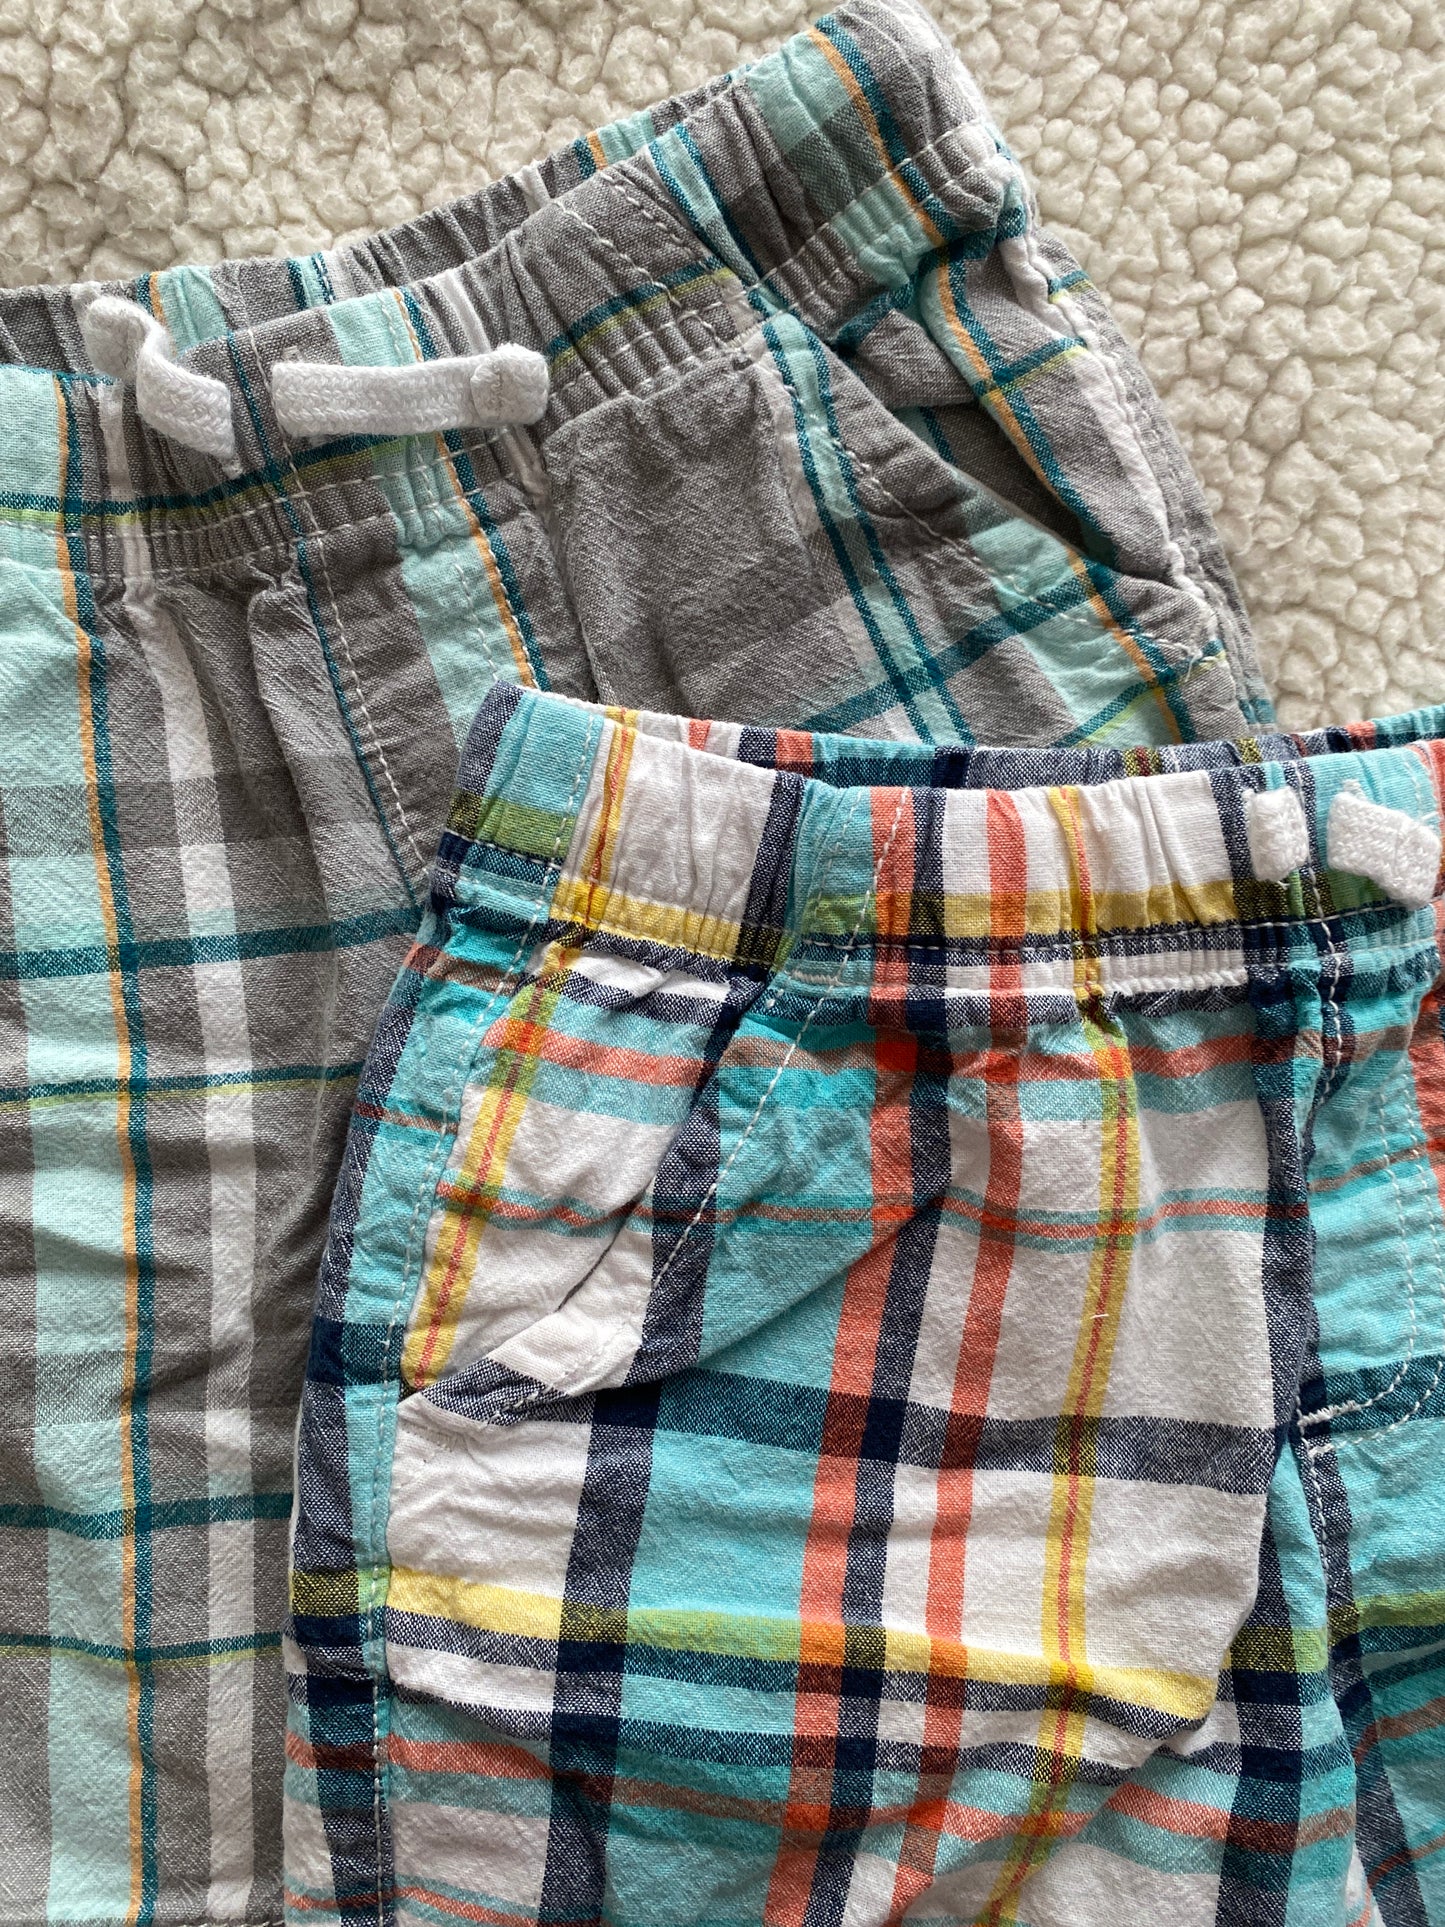 Jumping Beans boys 4t bundle of 2 shorts